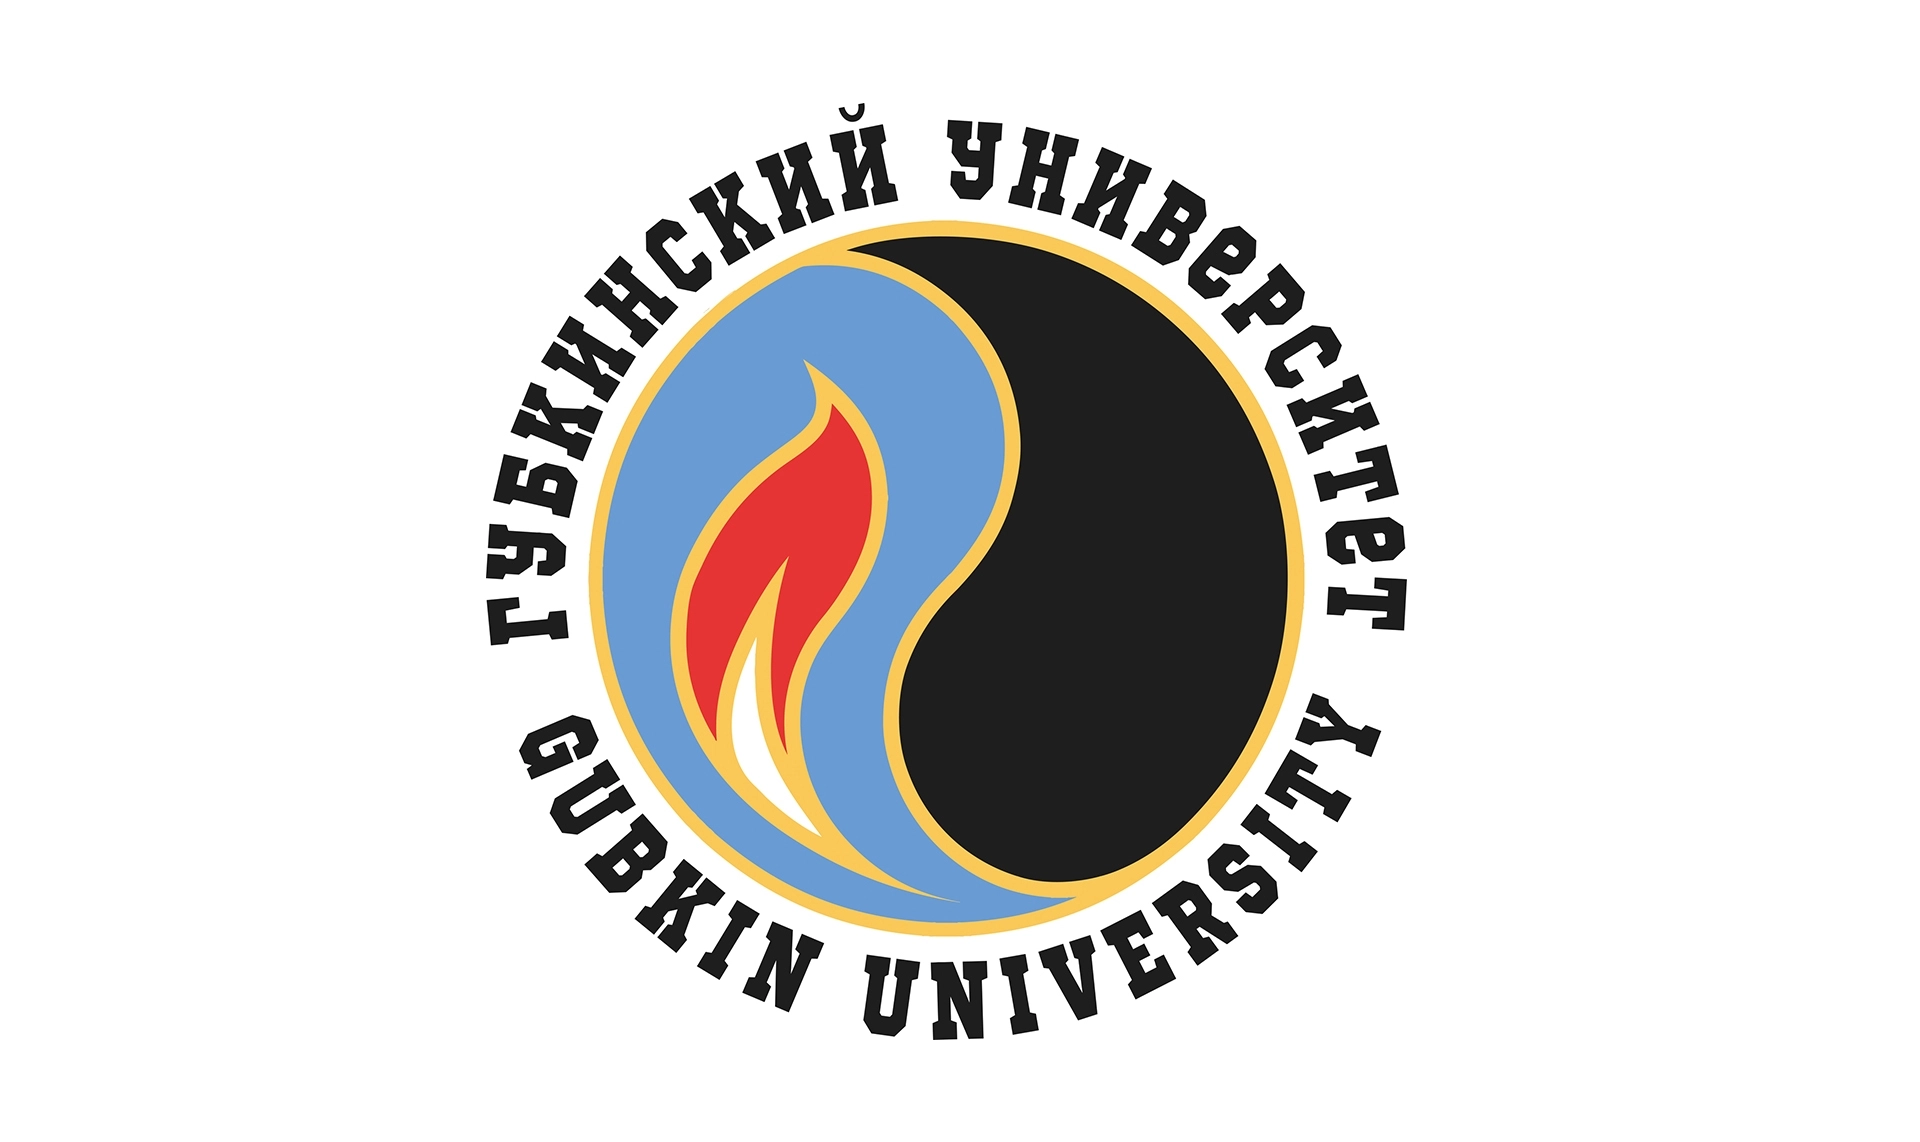 ZALA AERO signed a co-operation agreement with Gubkin Russian State University of Oil and Gas (RSU)